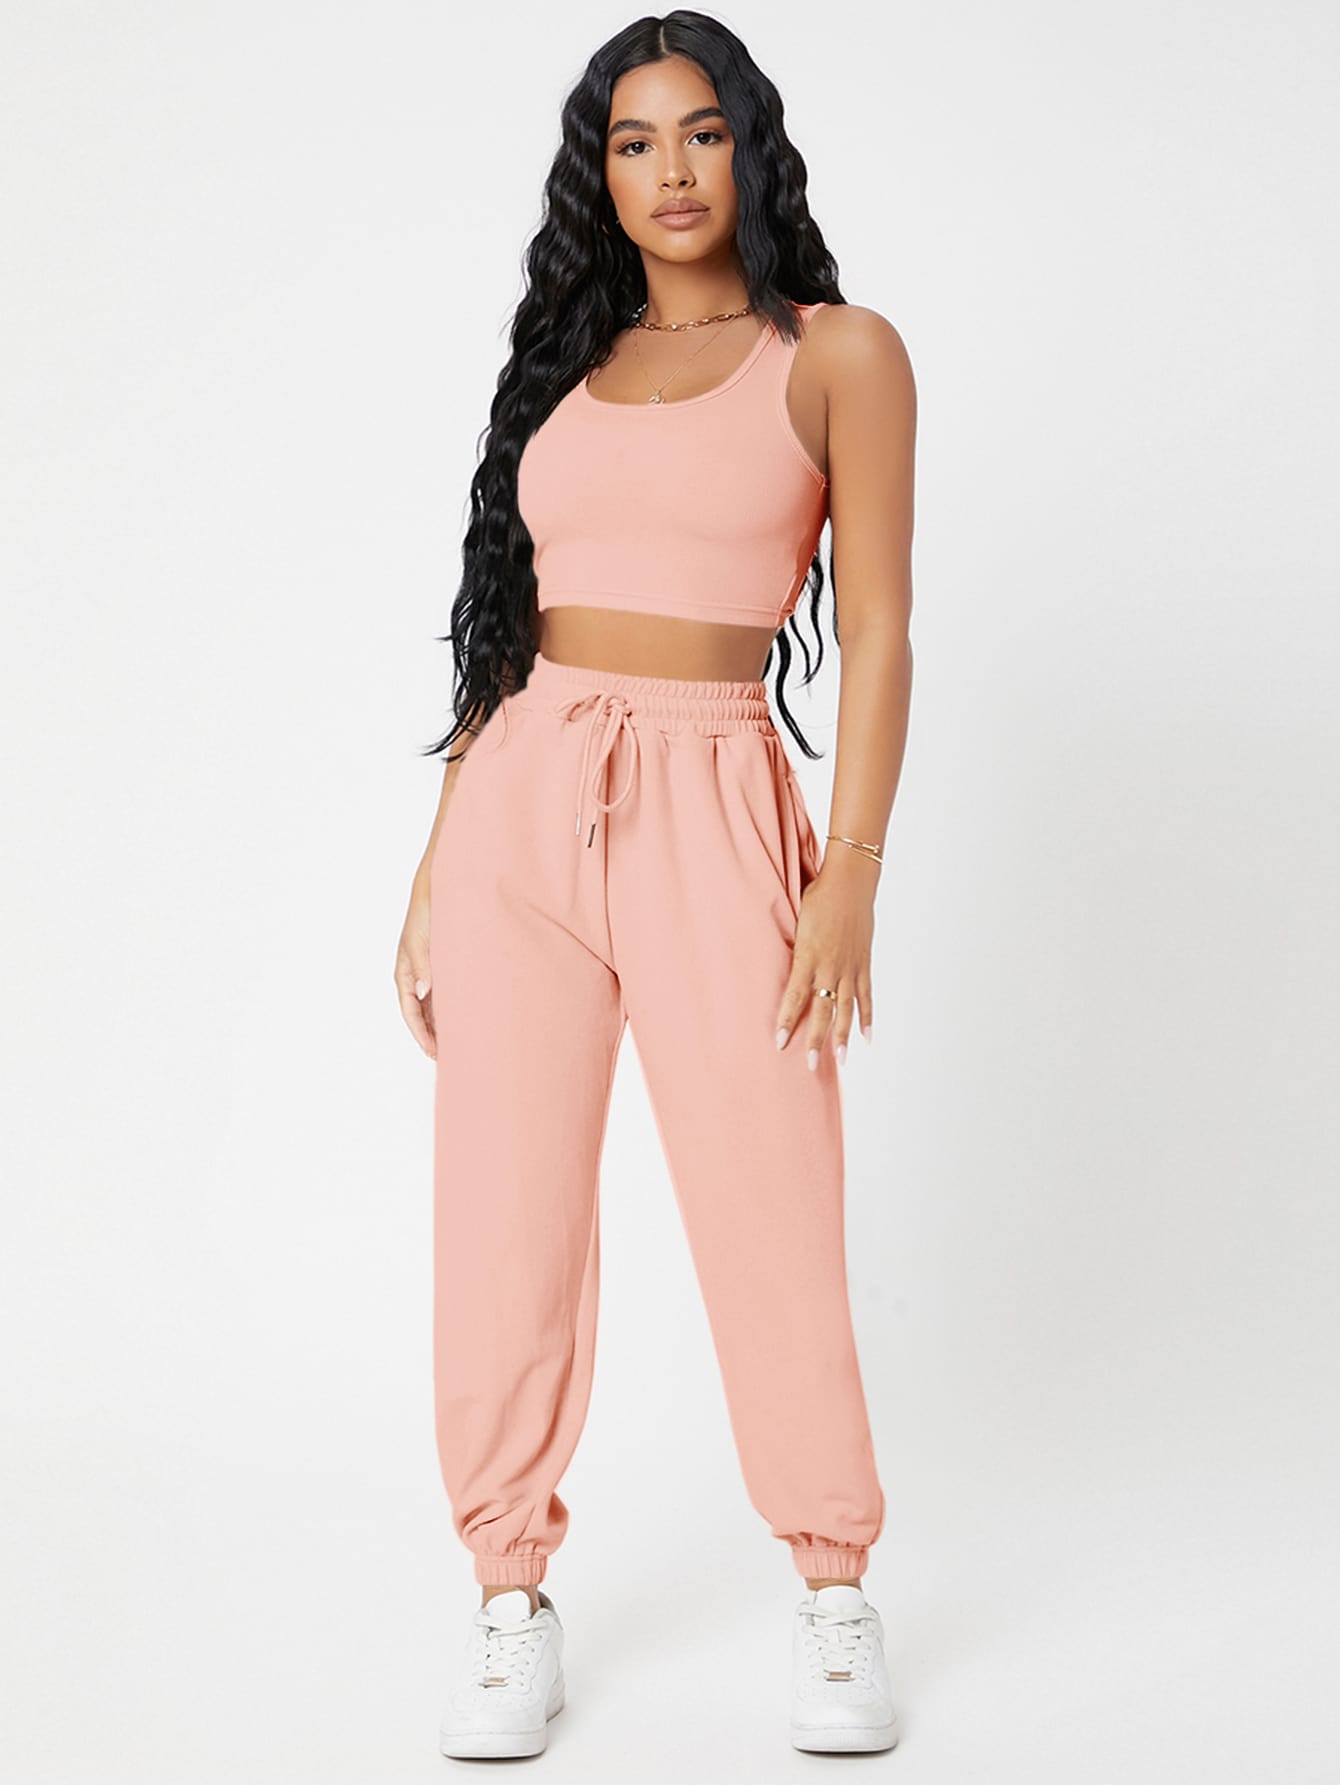 PETITE Solid Crop Tank Top And Joggers Set